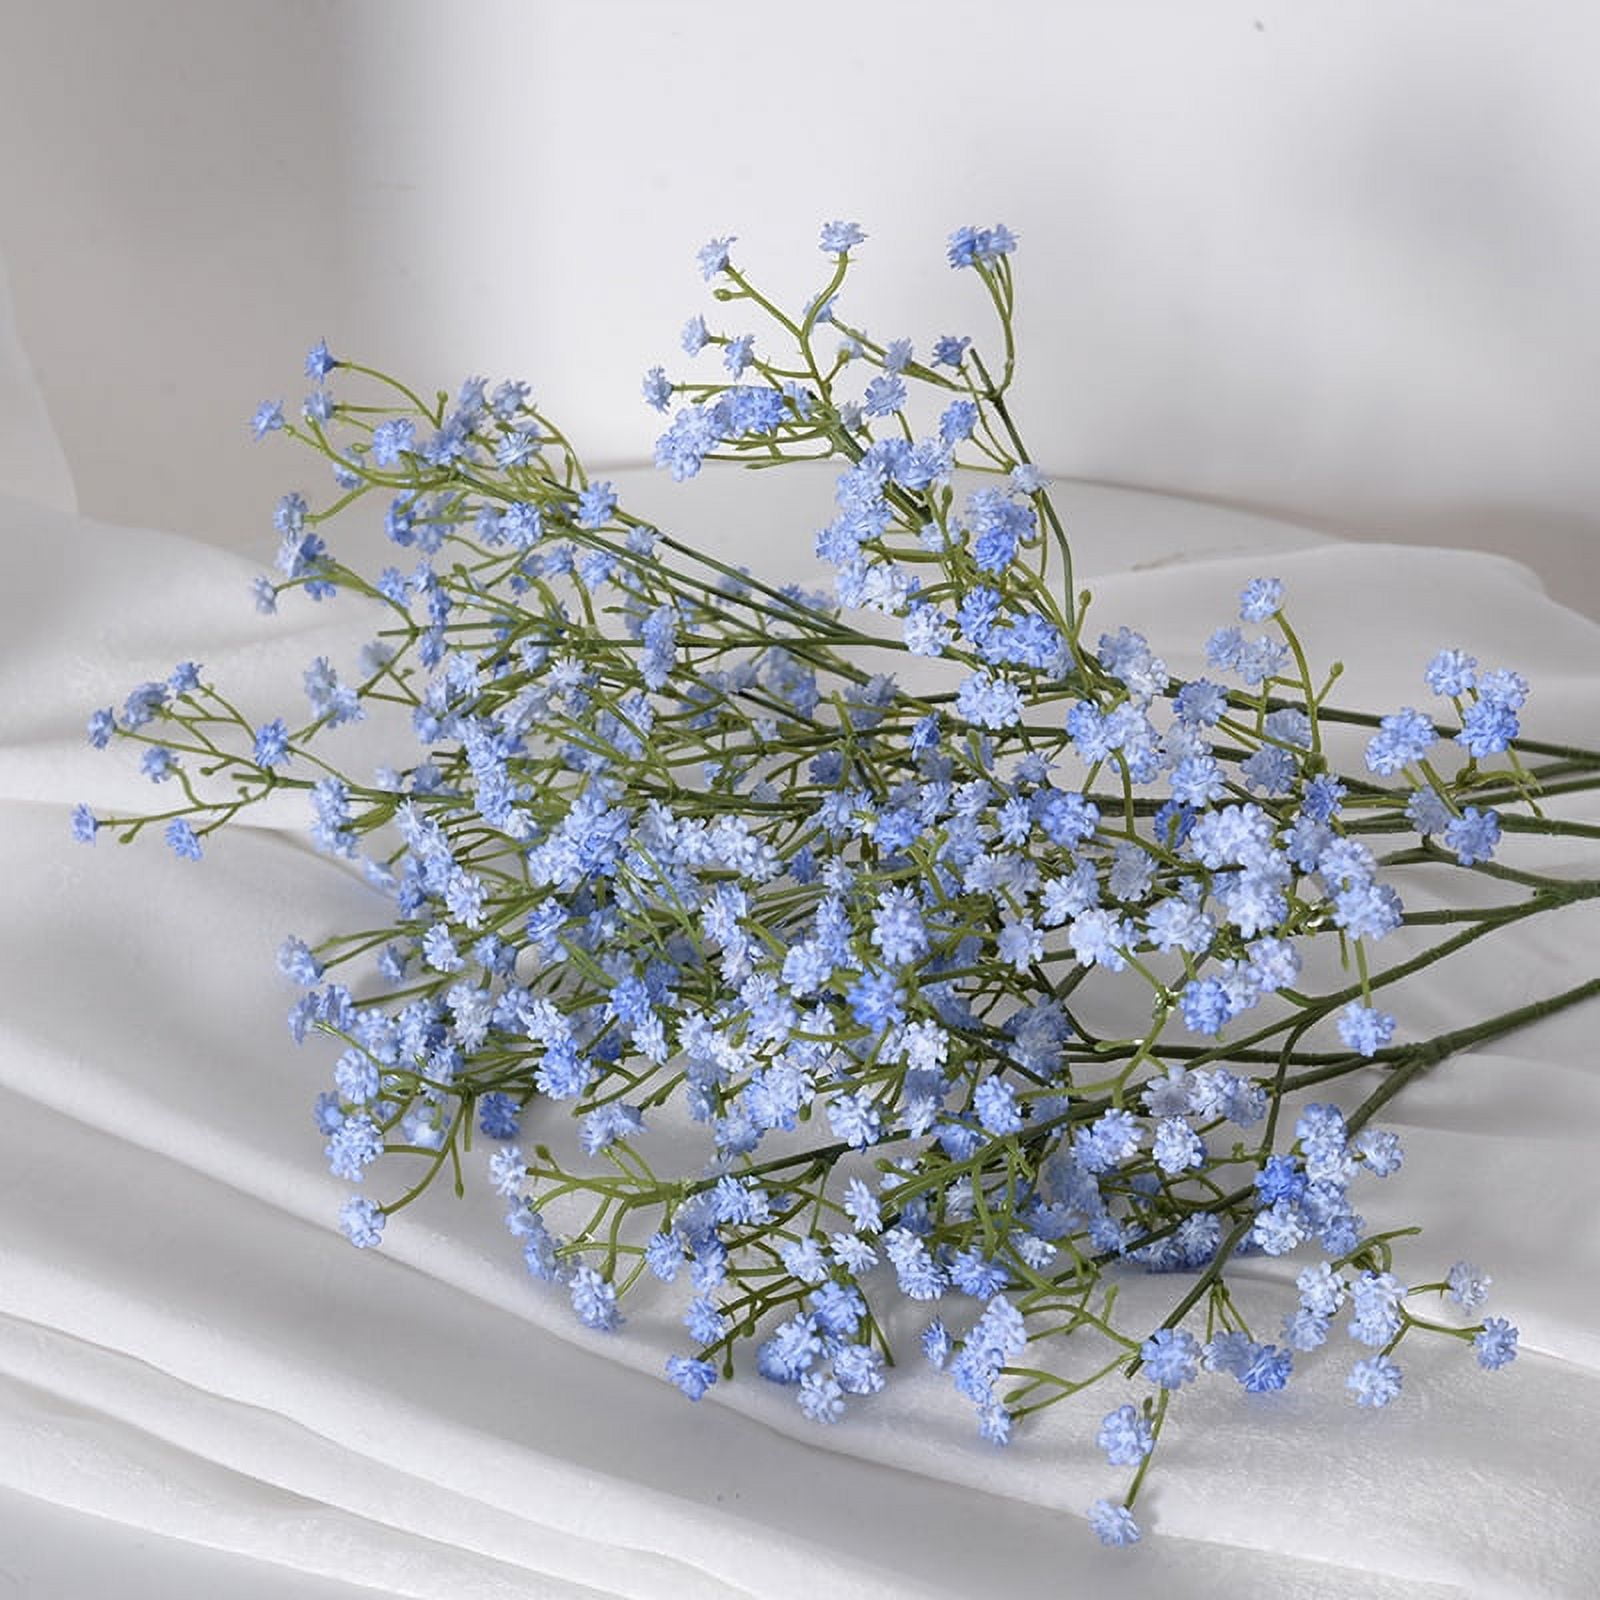  N&T NIETING Fake Baby Breath Fake Flowers 10Pcs,Real Touch  Gypsophila Babies Breath Flowers Artificial Bulk for DIY Wedding Bouquets  Baby Shower Home Garden Decoration,Blue : Health & Household